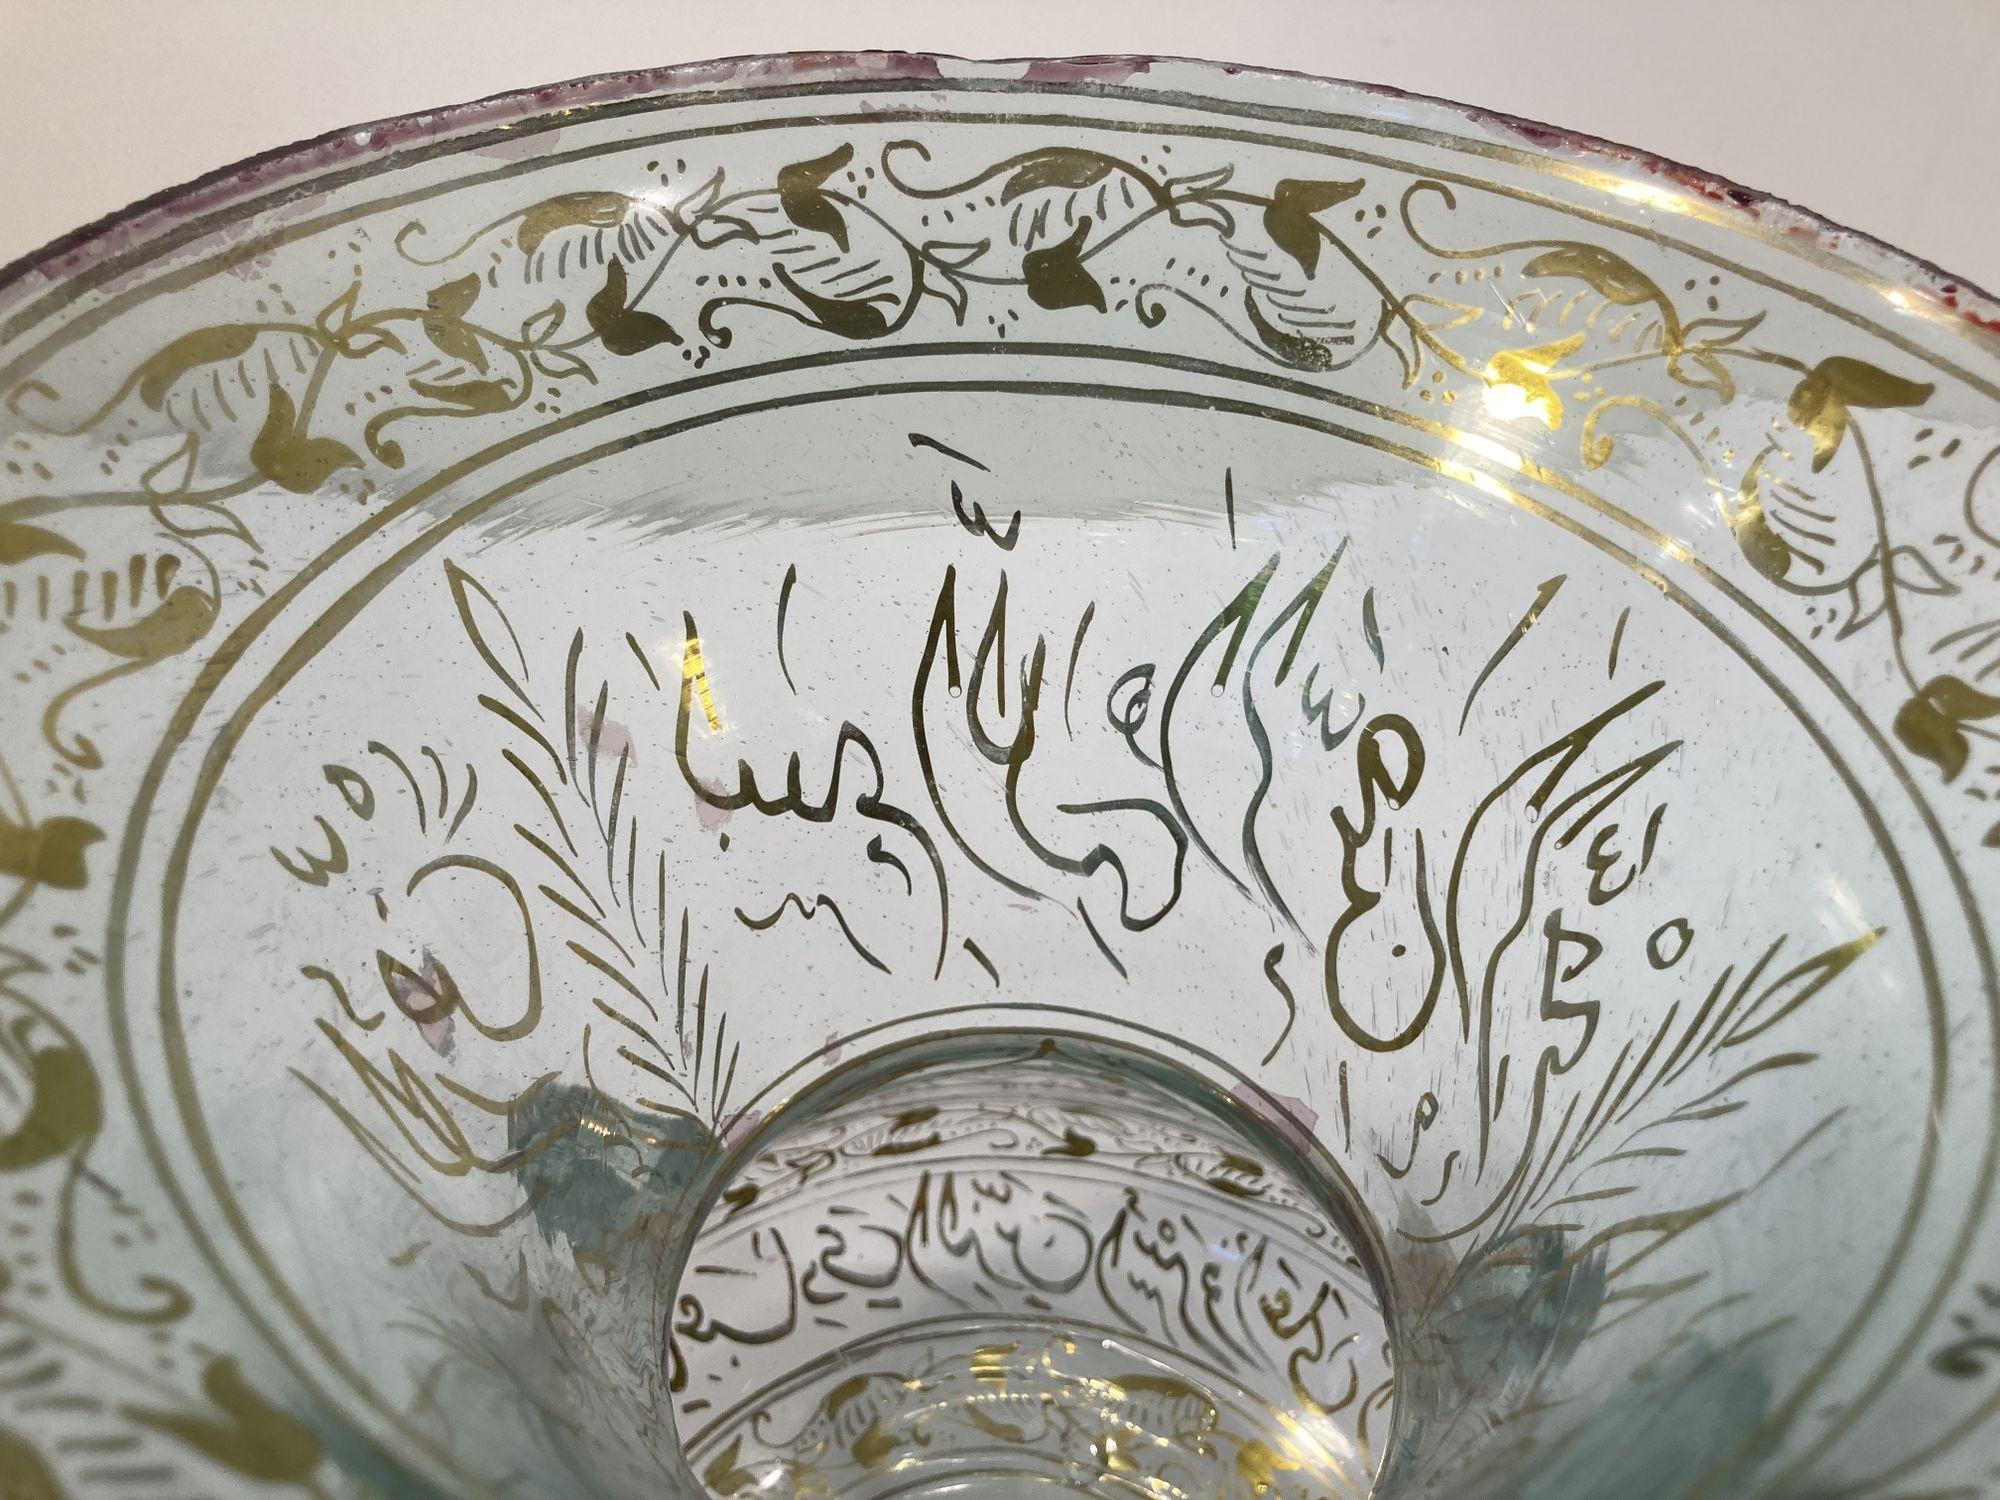 Handblown Mosque Glass Lamp in Mameluke Style Gilded with Arabic Calligraphy In Good Condition For Sale In North Hollywood, CA